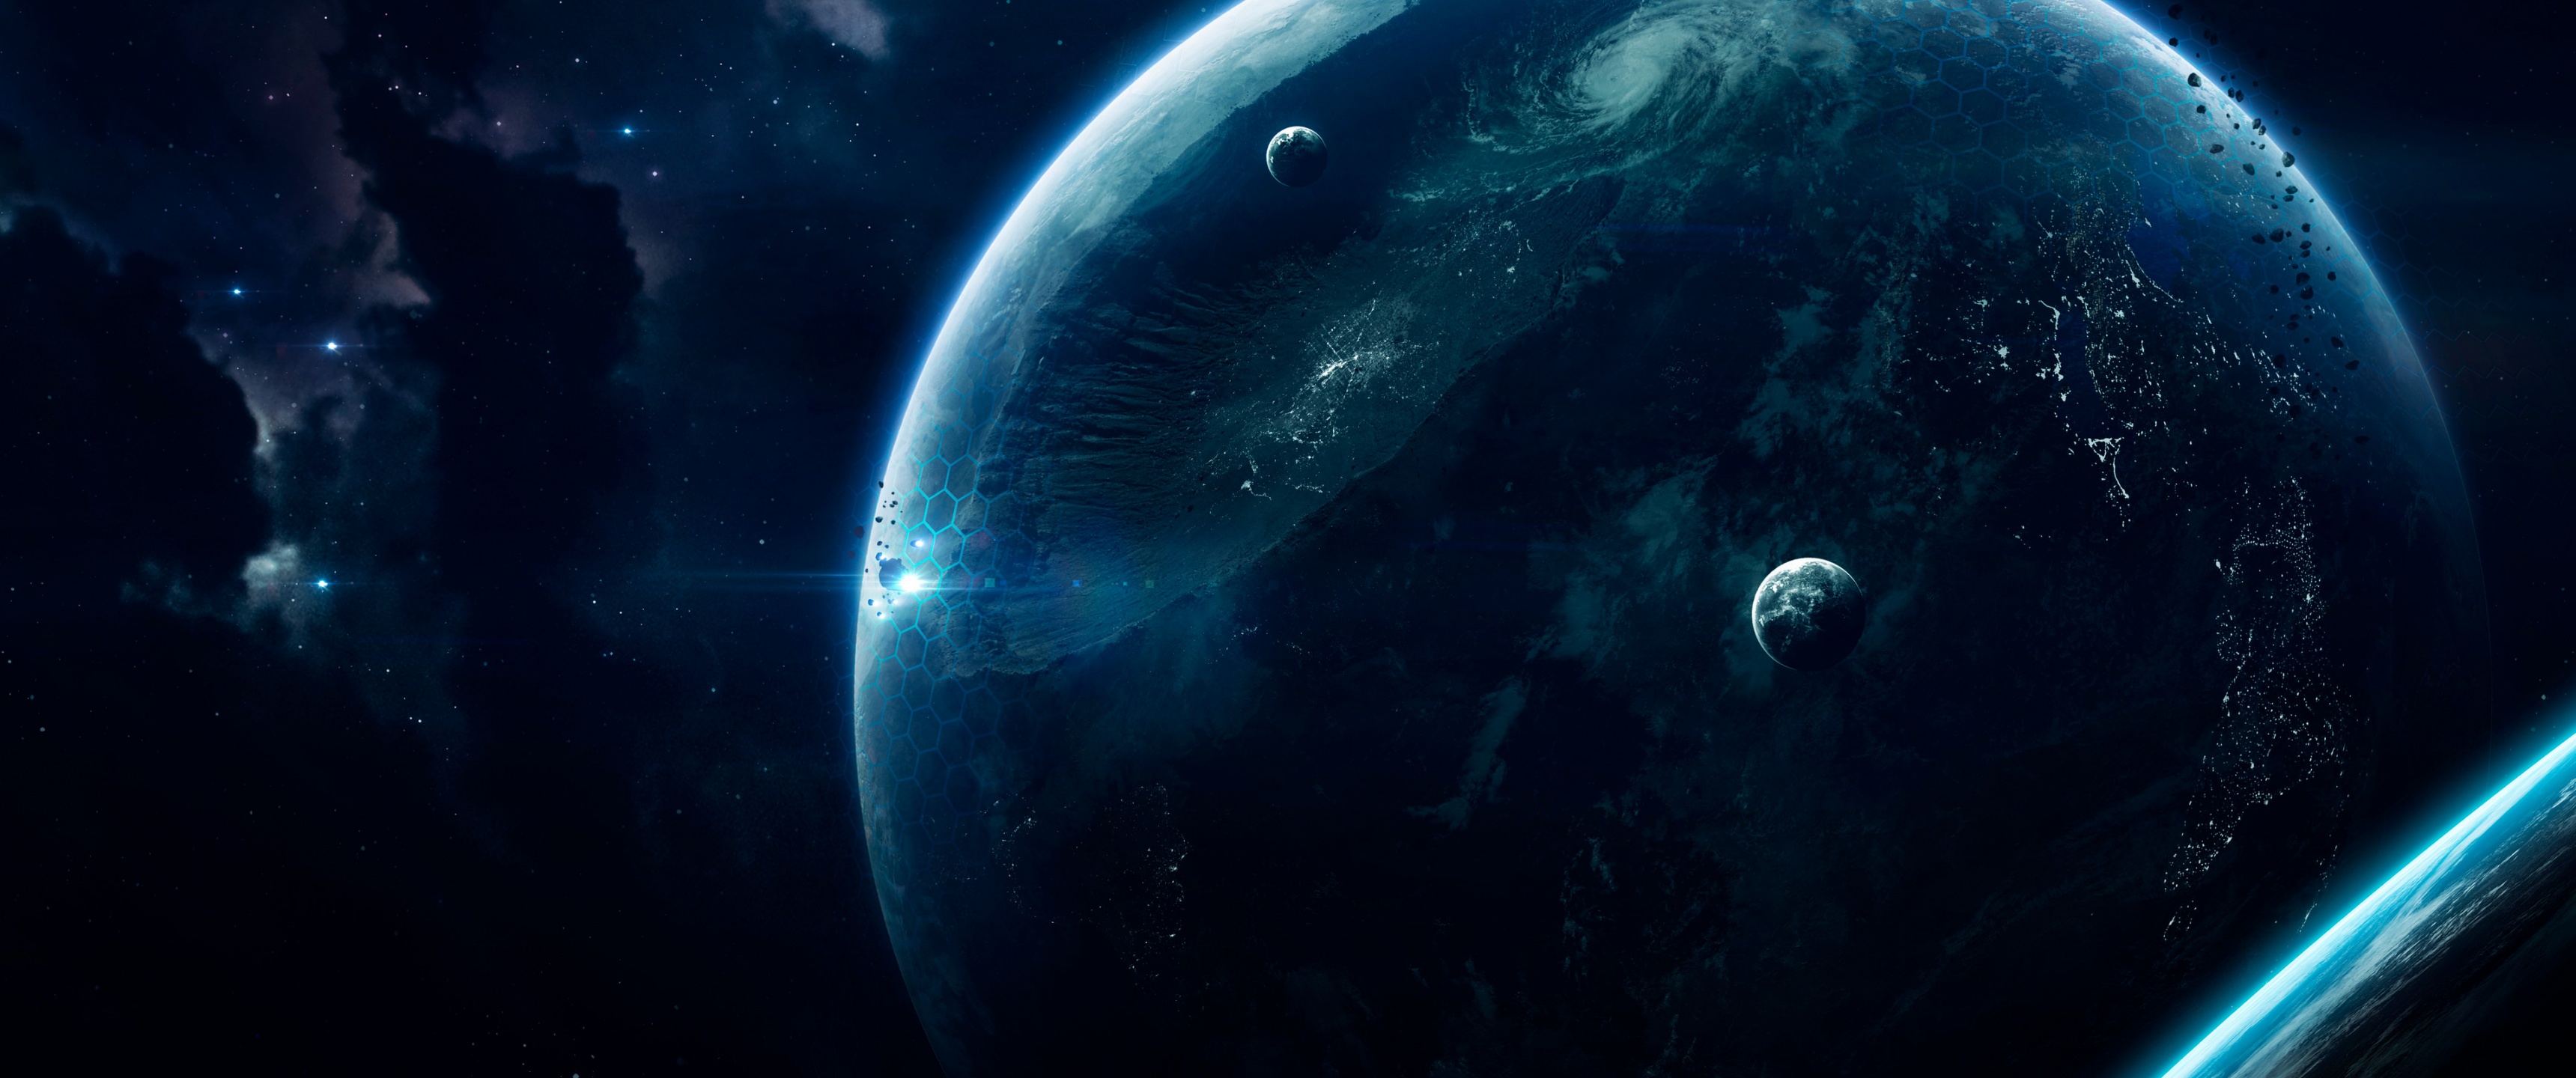 Deep space Wallpaper 4K, Earth, Planets, Crater, Space, #2951